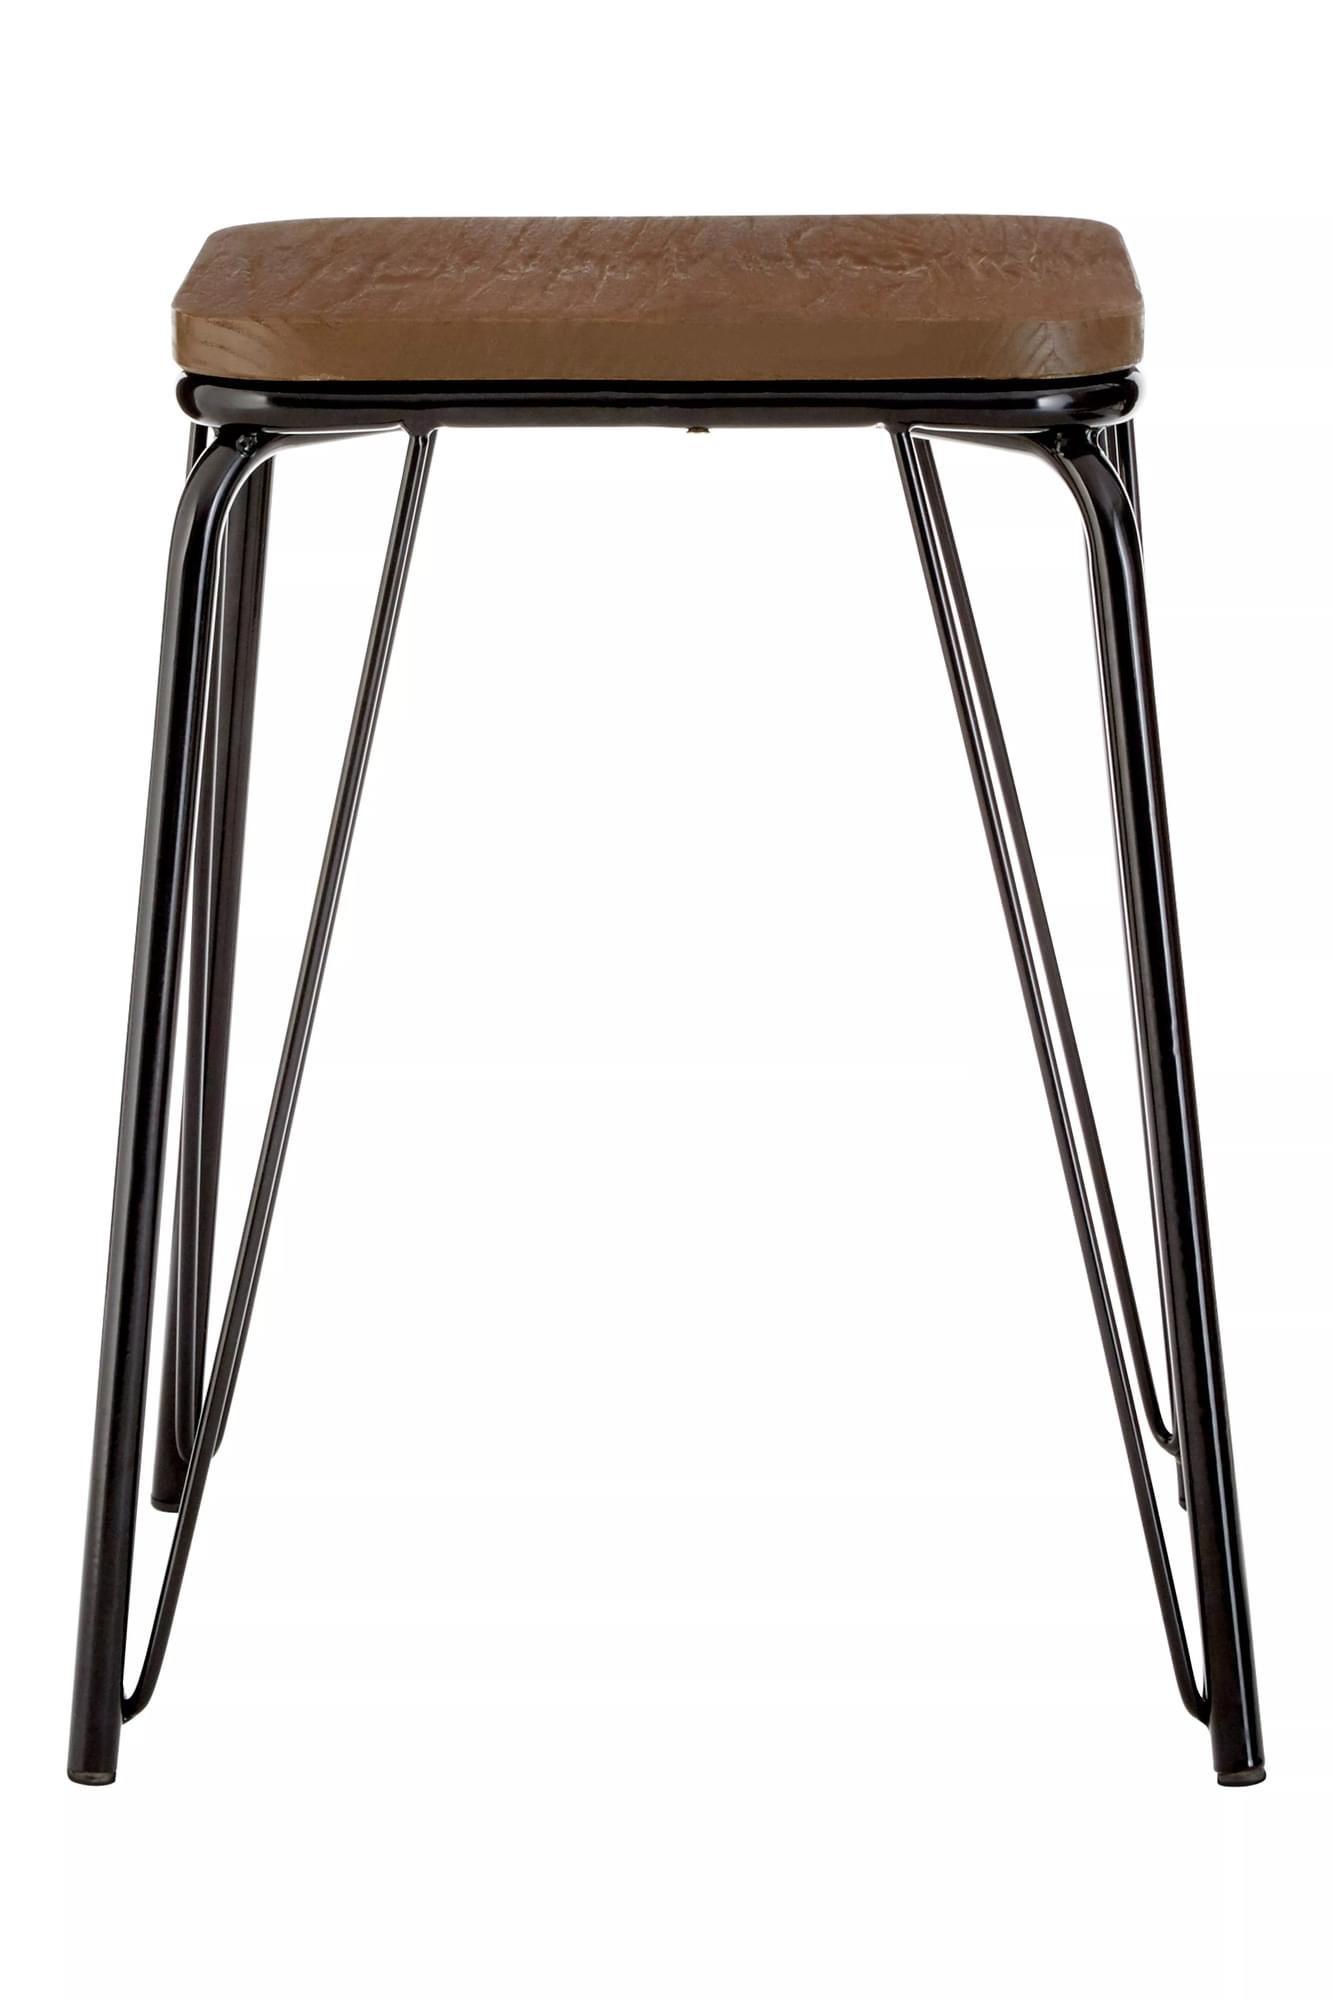 Interiors by Premier Chrome Metal and Elm Wood Stool, Small Square Stool, Accent Wooden Stool for Ho